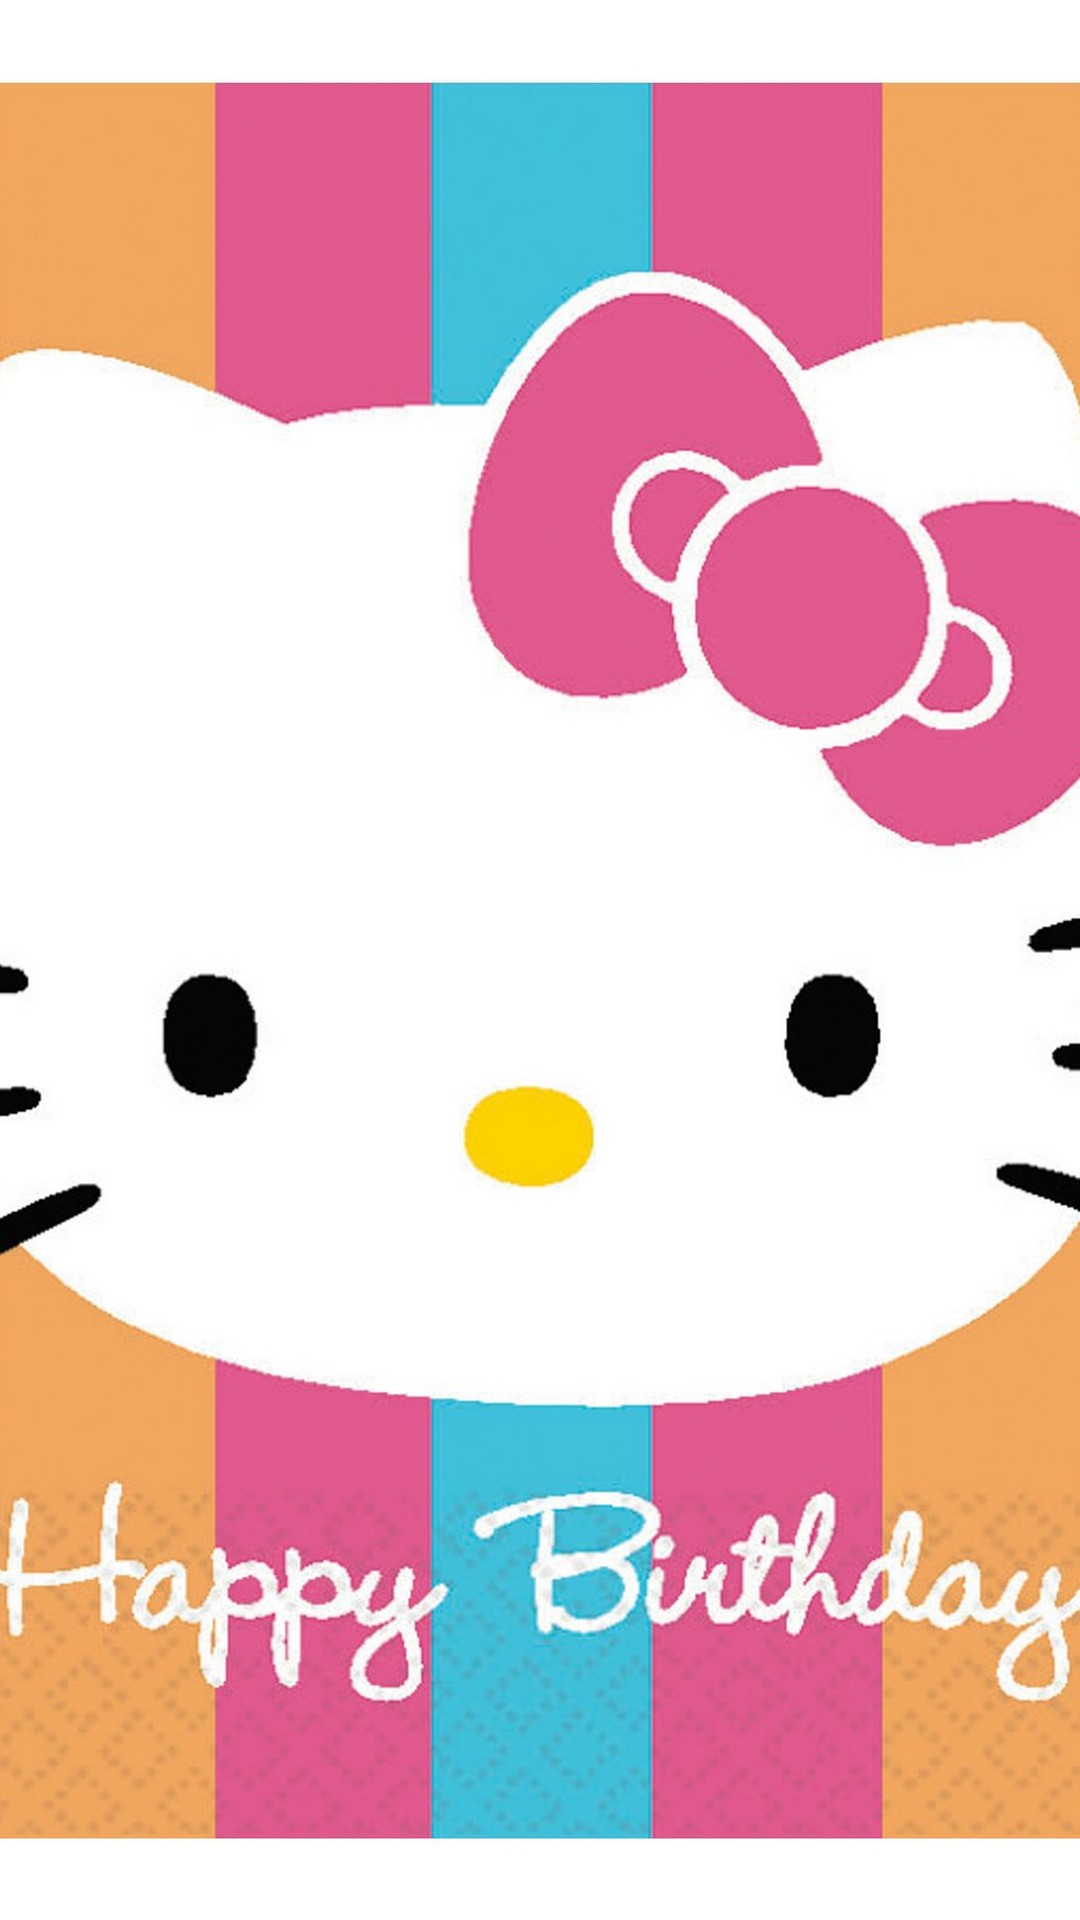 Android Wallpaper HD Sanrio Hello Kitty with image resolution 1080x1920 pixel. You can make this wallpaper for your Android backgrounds, Tablet, Smartphones Screensavers and Mobile Phone Lock Screen